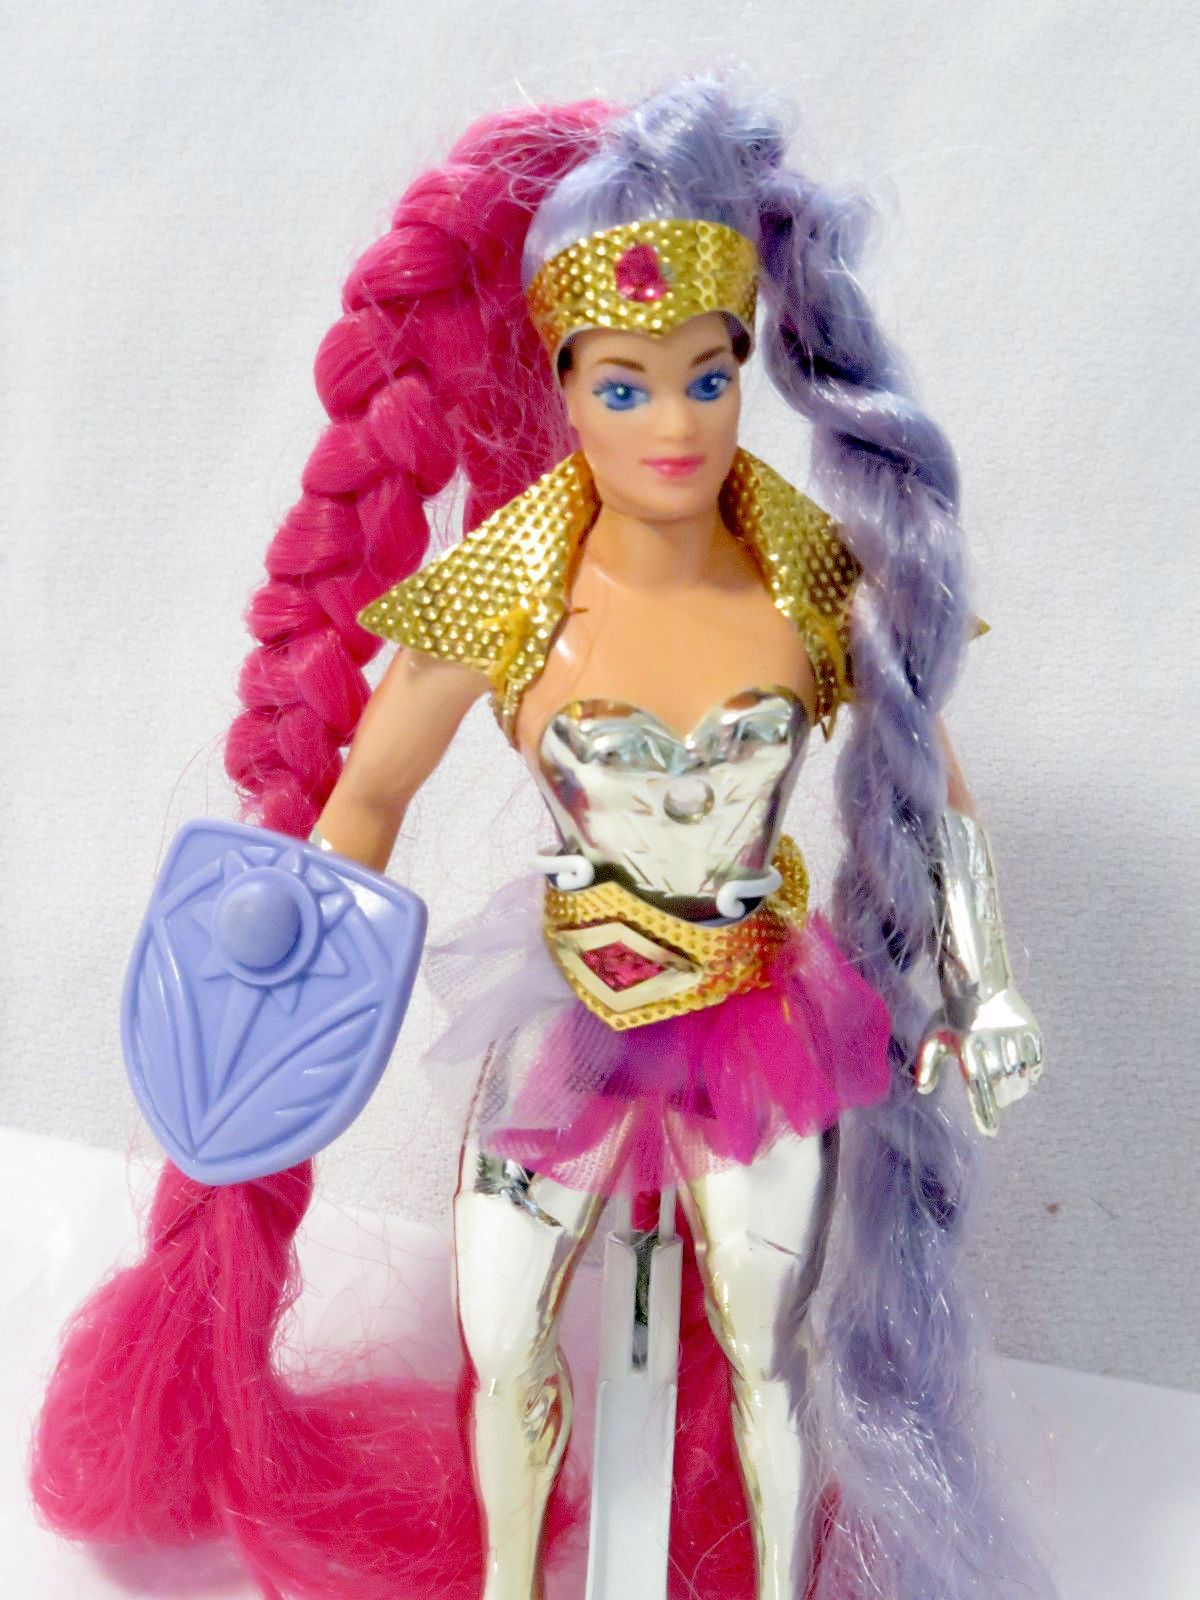 She-Ra: Princess of Power (1985) - (figures, dolls, toys and objects) 19